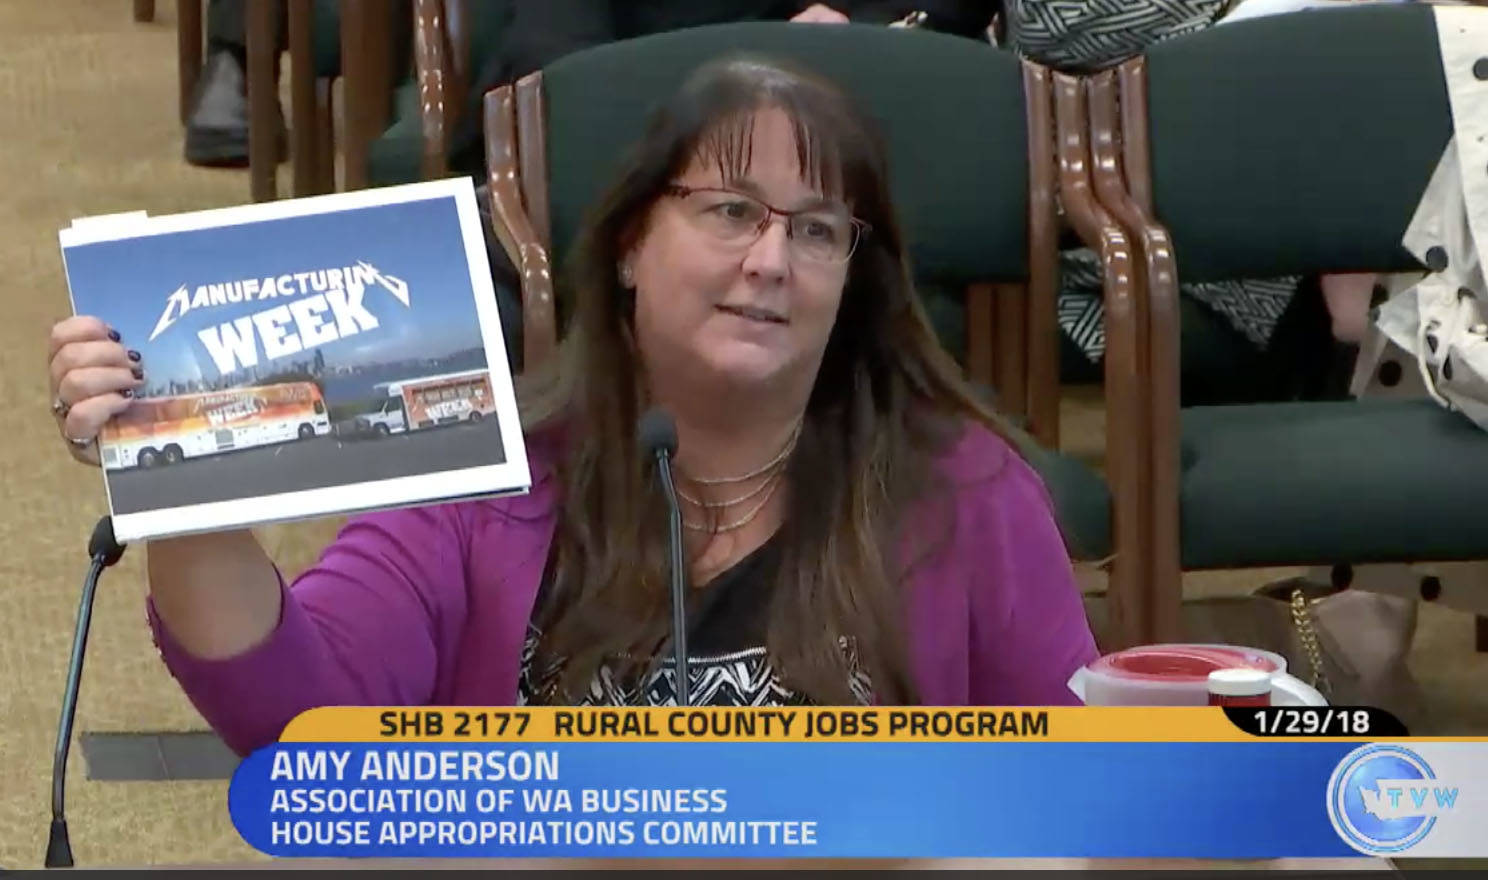 Amy Anderson, government affairs director of the Association of Washington Businesses, shows lawmakers the association’s review of 70 Washington manufacturers at the hearing for HB 2177 on Monday, Jan. 29. She said every industry expressed a need for skilled workers. Screenshot courtesy of TVW